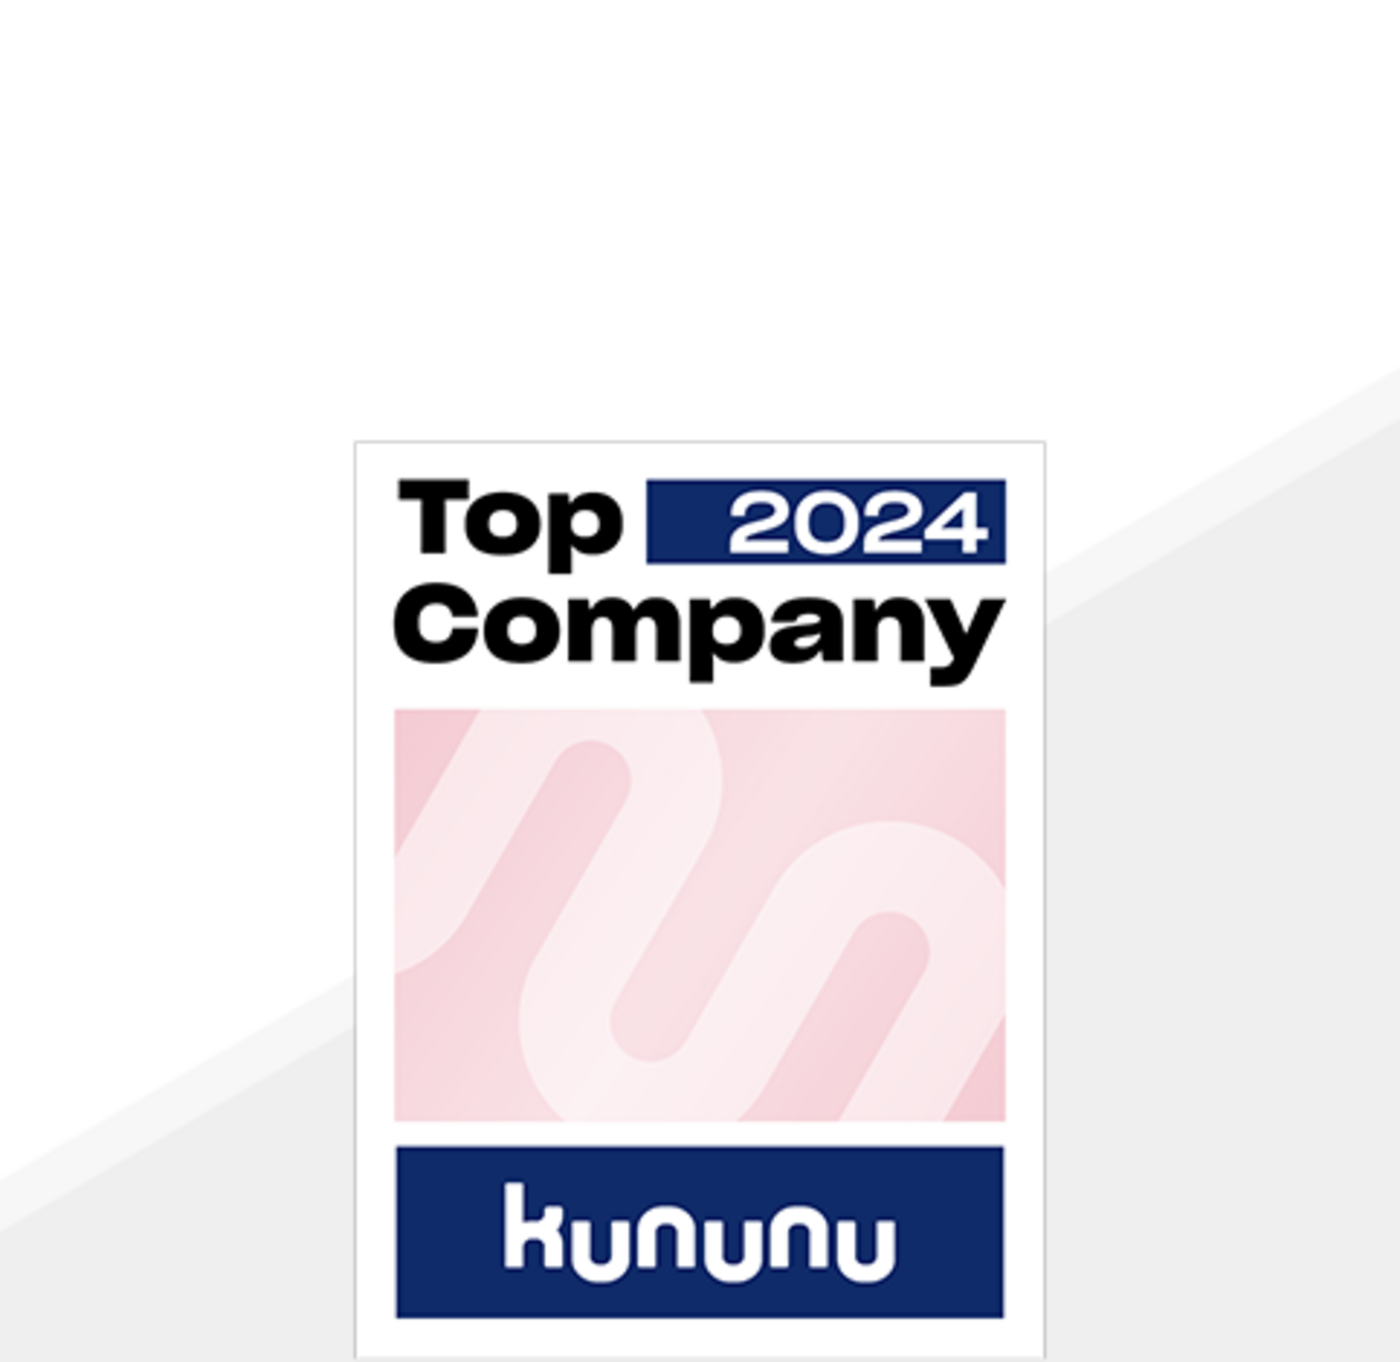 We are among the top employers 2024!